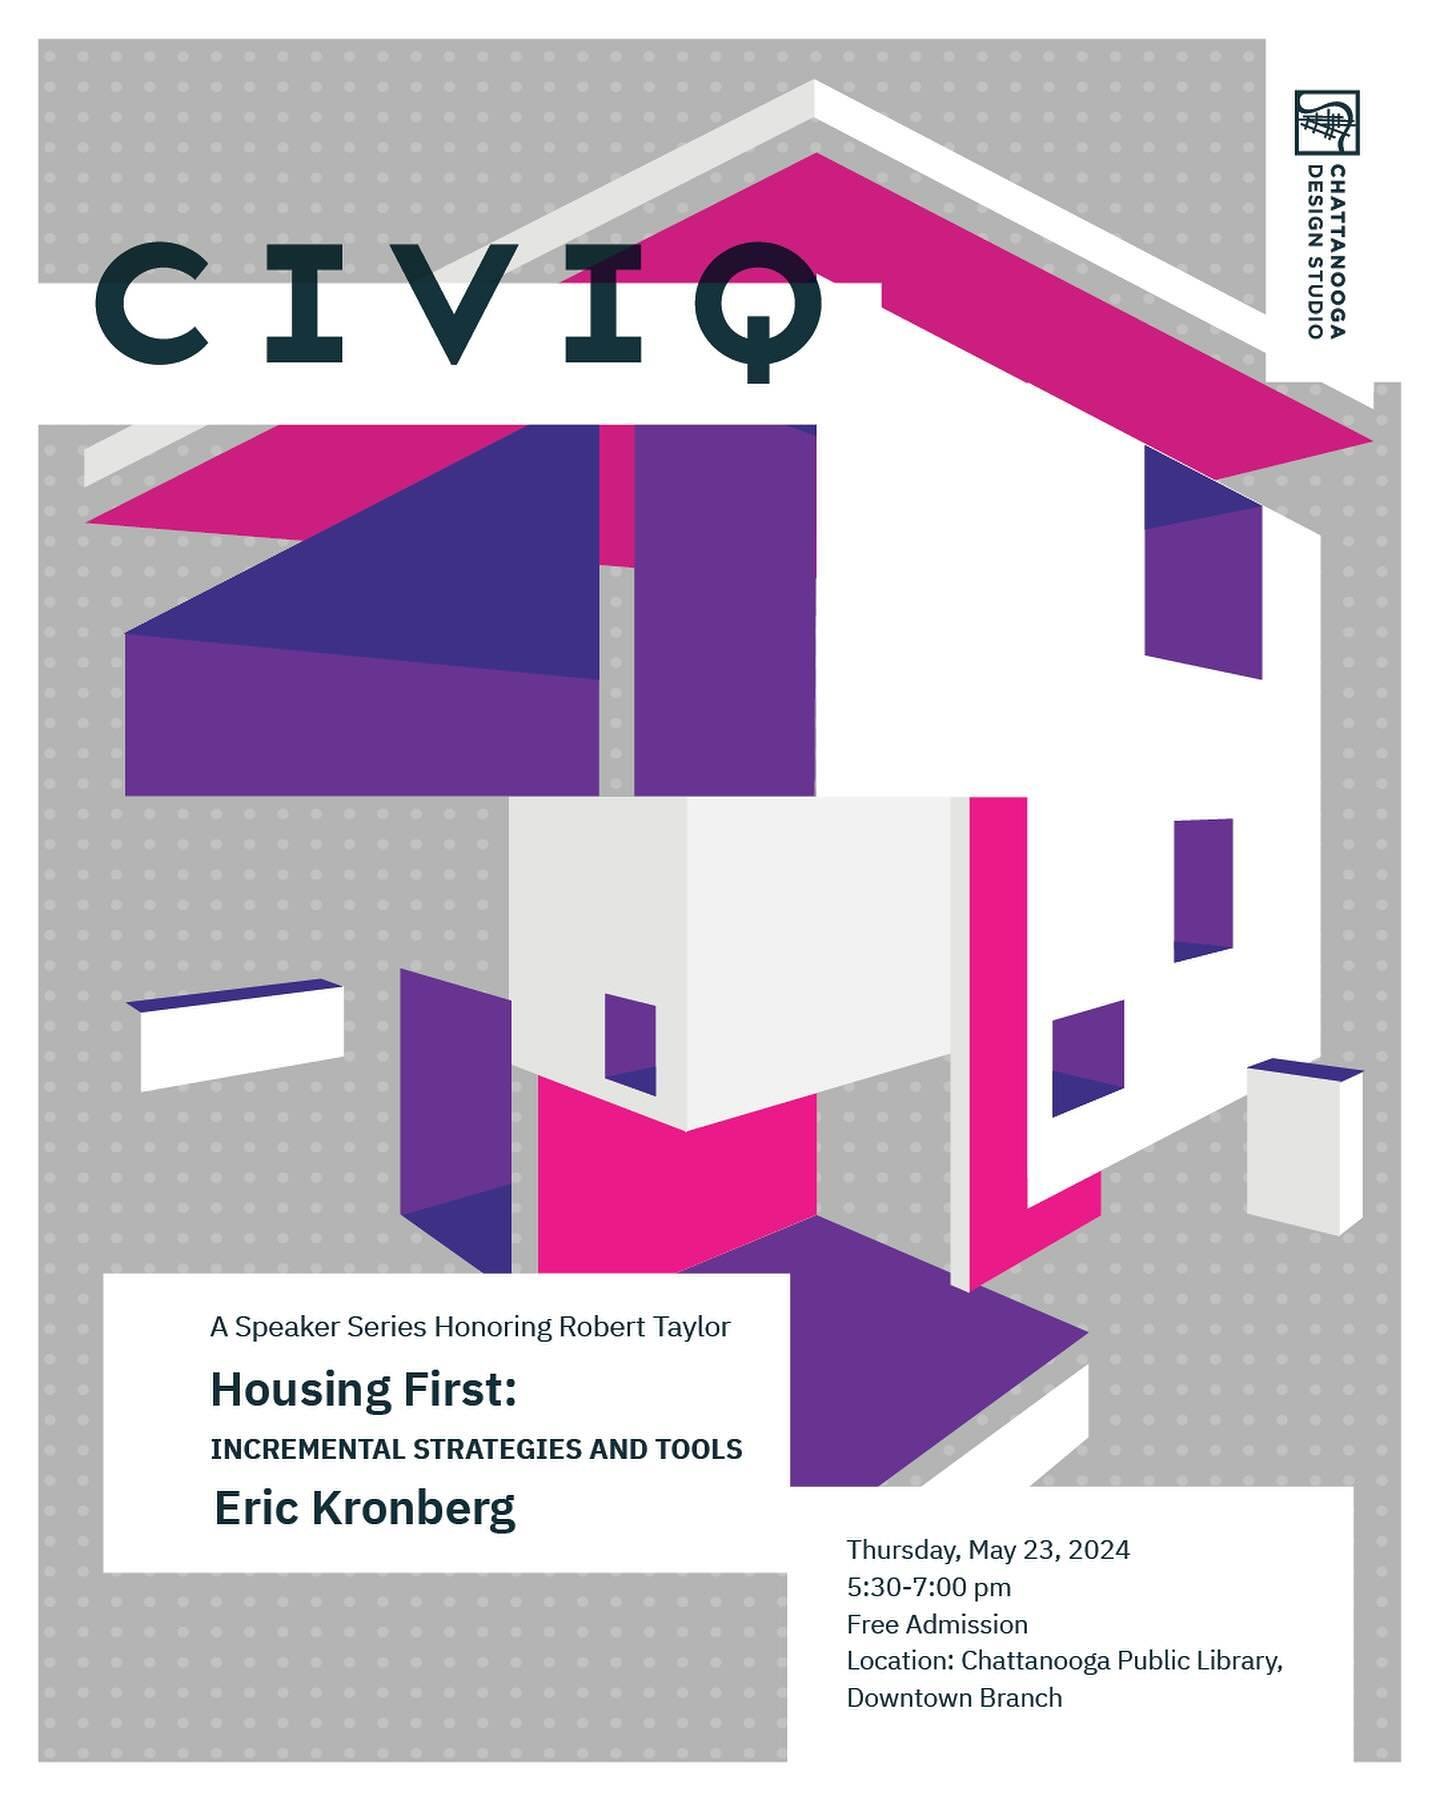 ANNOUNCING MAY CIVIQ

CIVIQ with Eric Kronberg
&ldquo;Housing First, Incremental Strategies and Tools&rdquo;
Thursday, May 23
Chattanooga Public Library, Downtown Branch
Tickets: always free, all welcome

Vibrant communities need to be inclusive comm